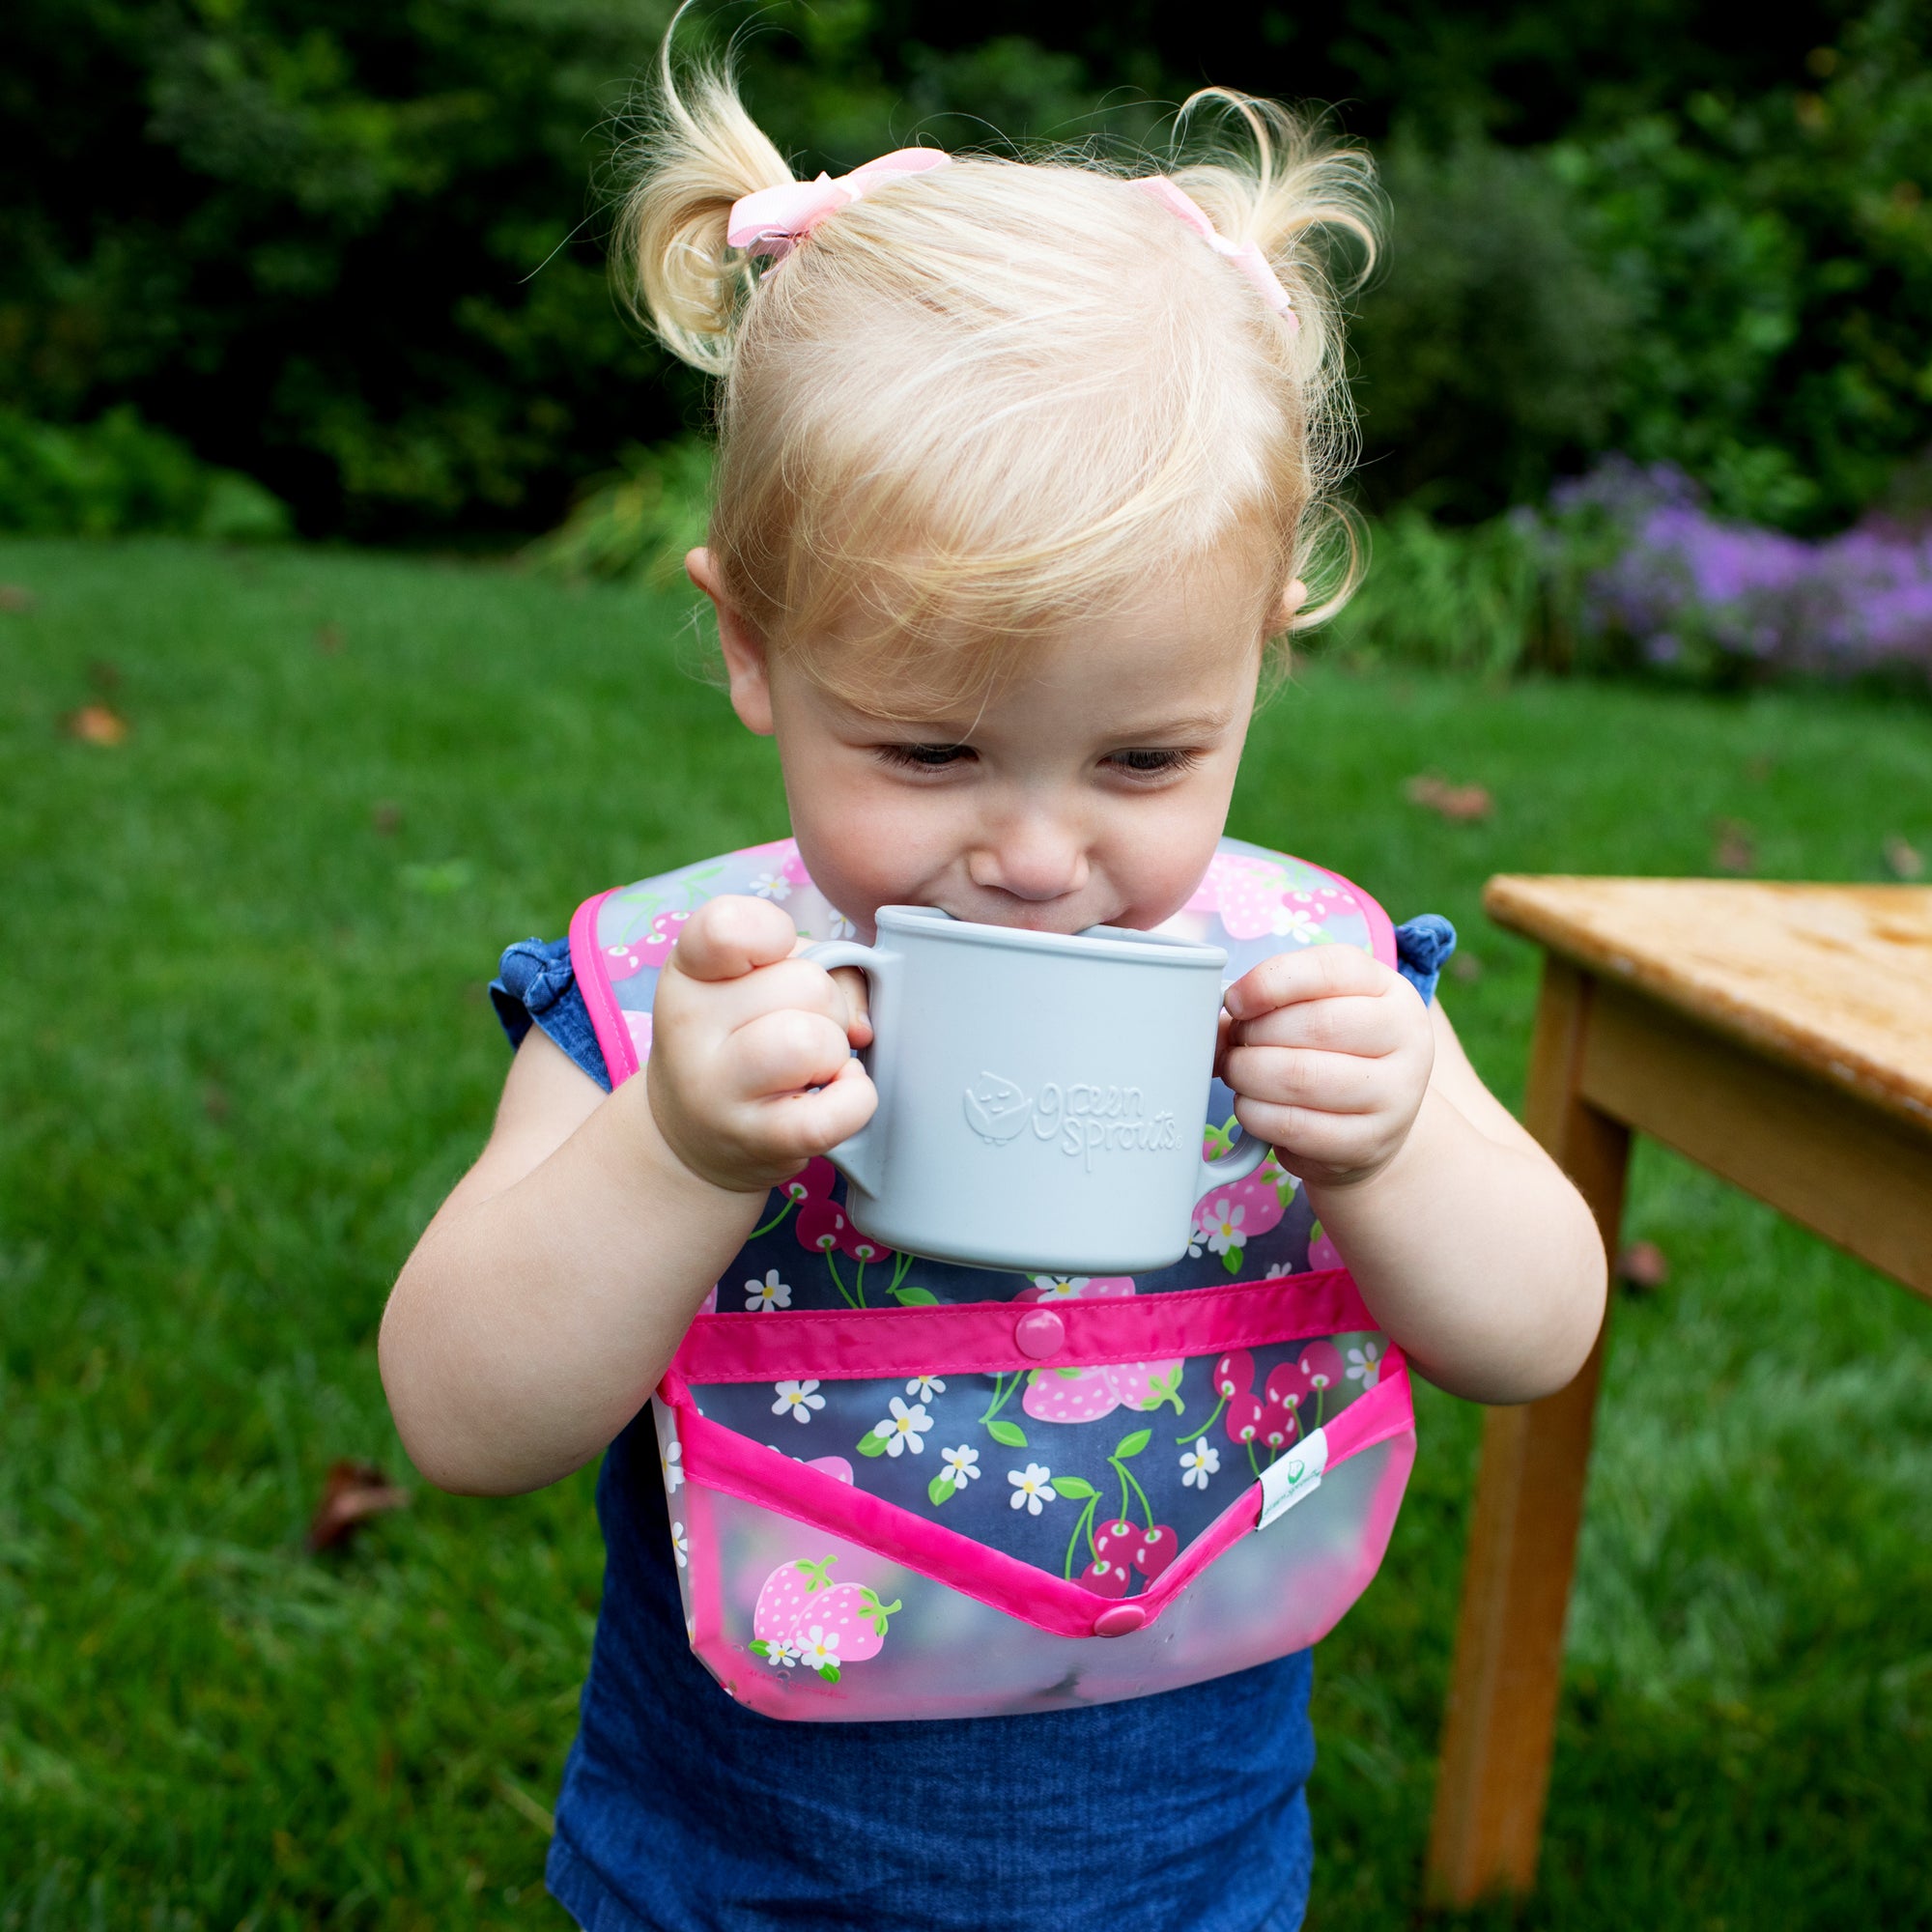 A cute little girl with pigtails trying to drink out of the gray Learning Cup made from Silicone and giggling at the same time.